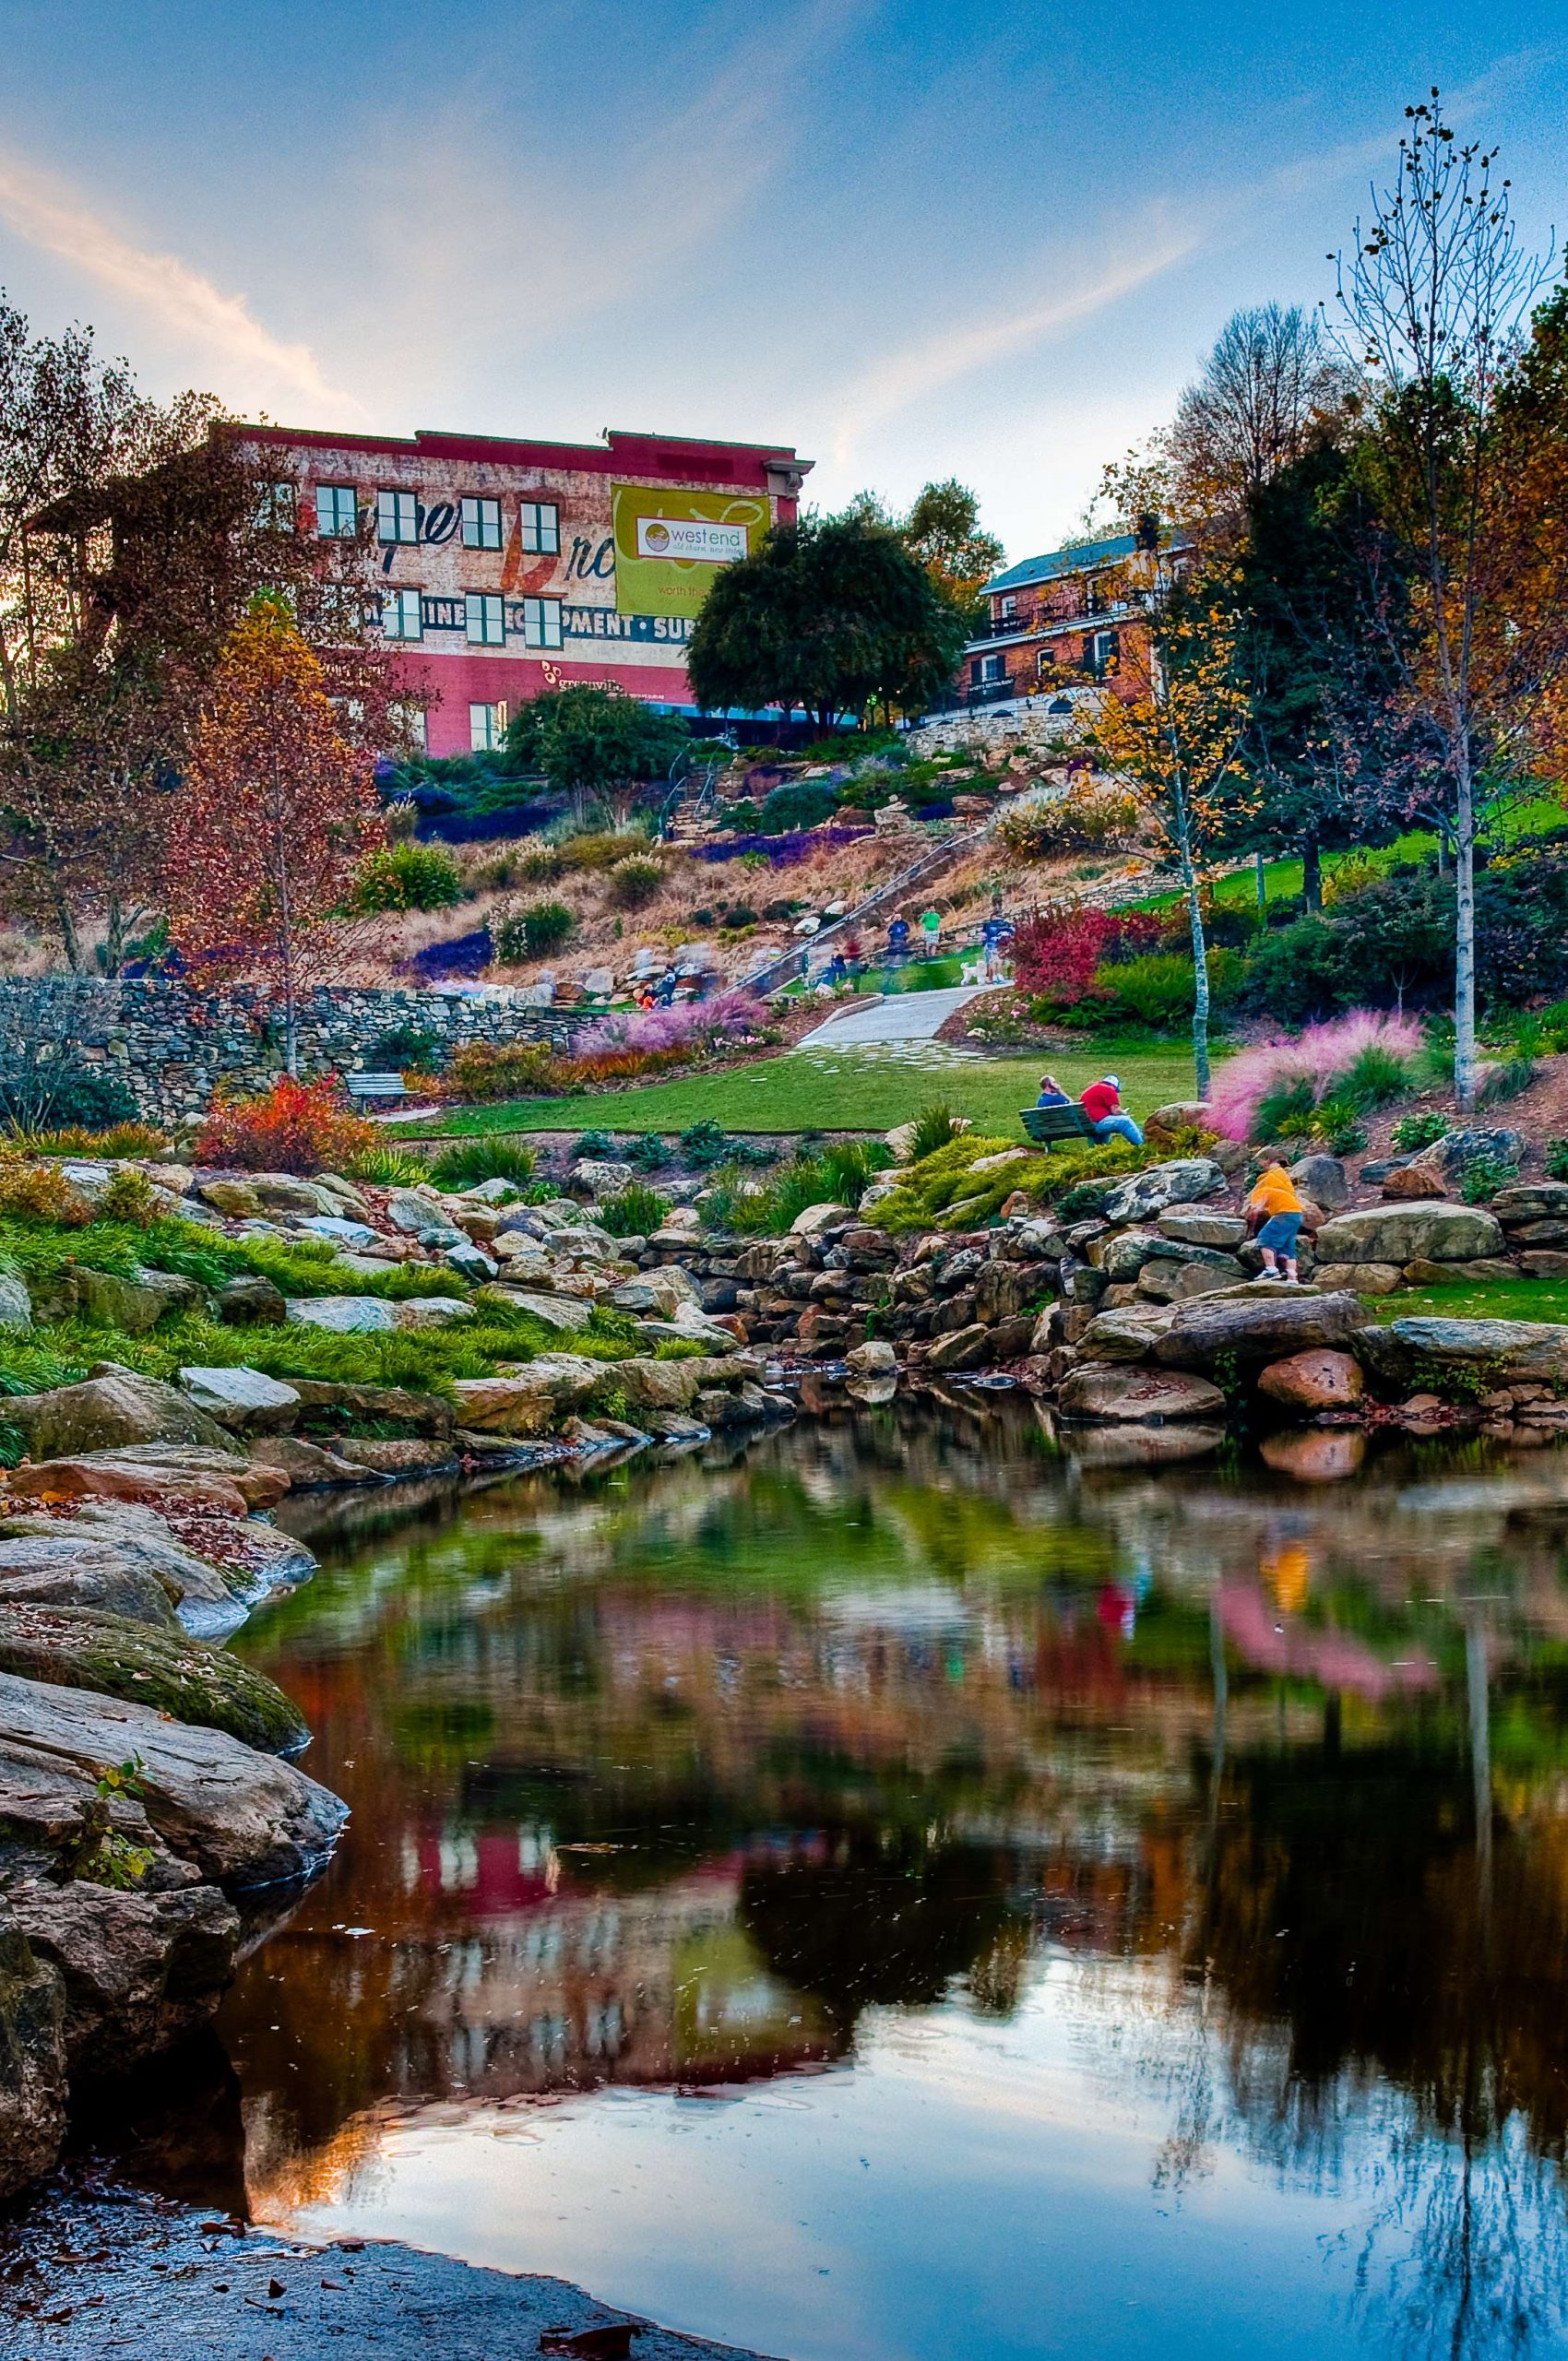 One of the most unique things about Greenville is the city's park and outdoor areas. This picture is another view of Falls Park on the Reedy.